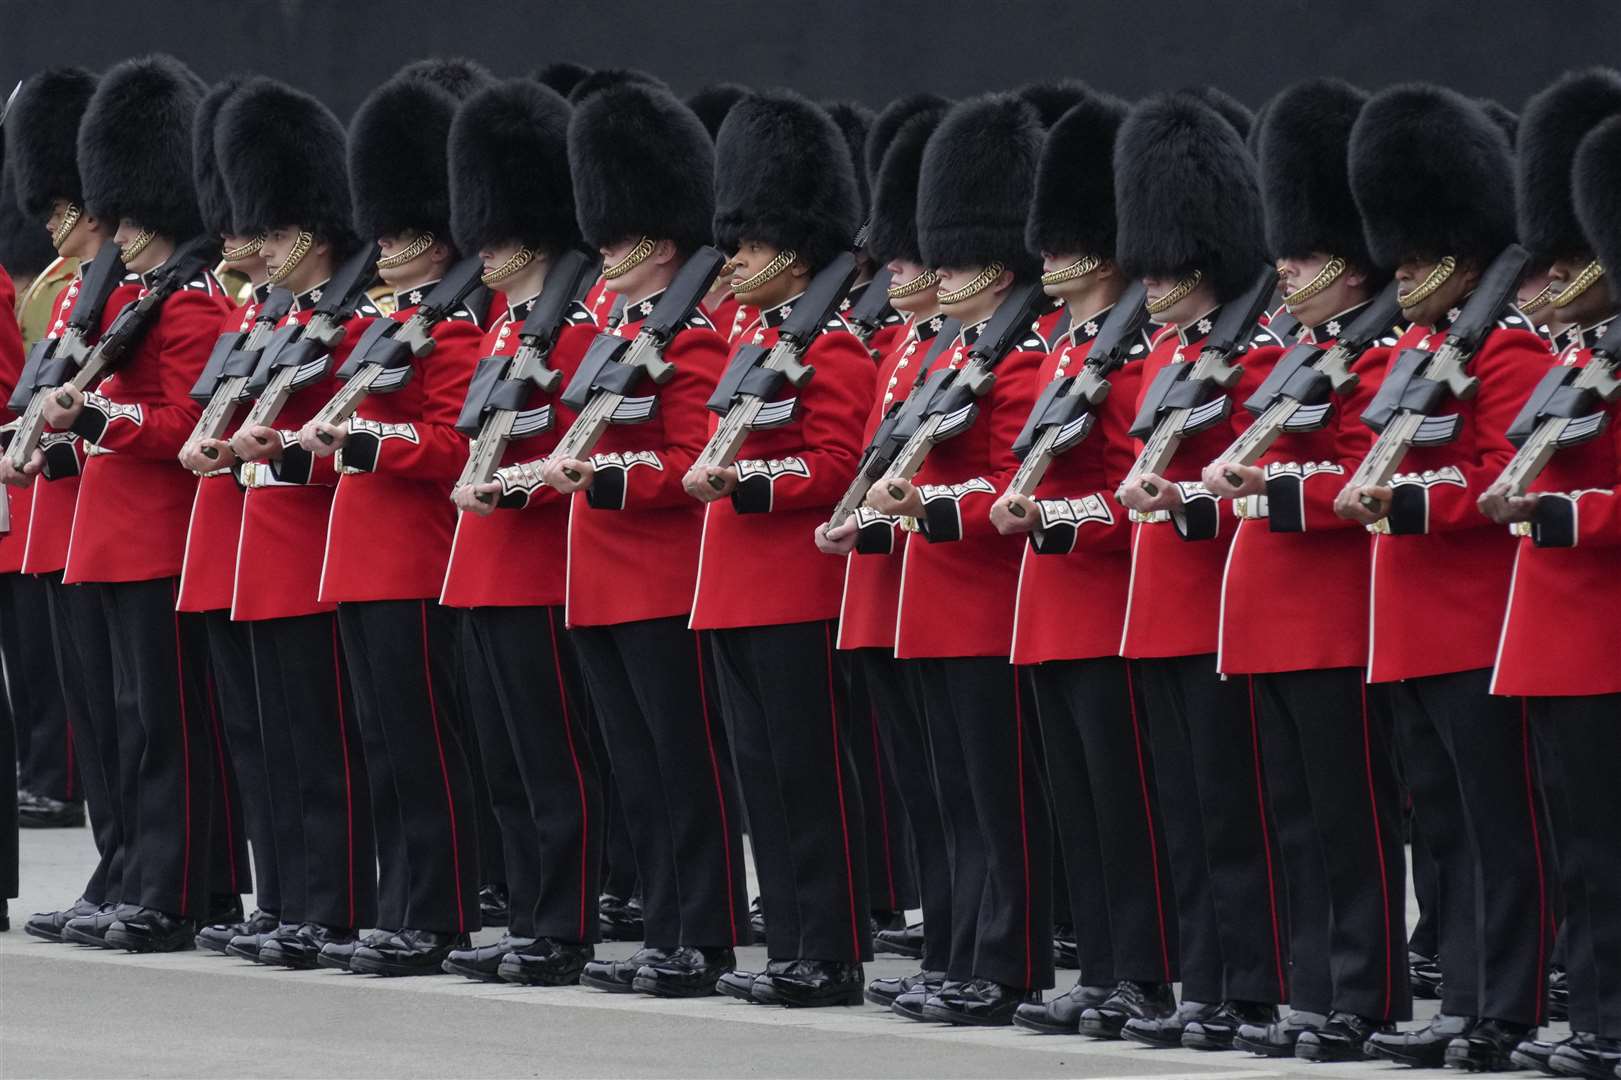 The Queen’s Guard line up at the Palace of Westminster ahead of the State Opening of Parliament (Kirsty Wigglesworth/PA)